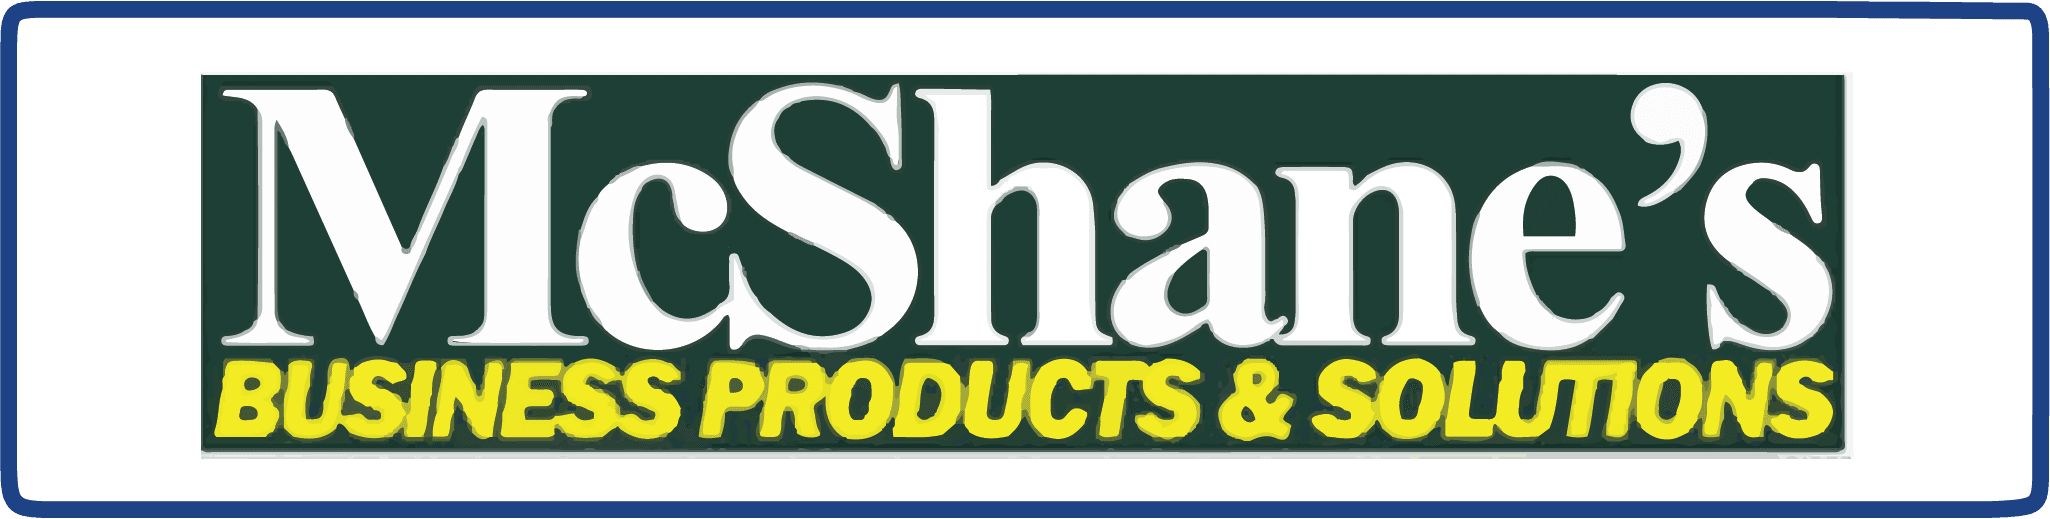 McShane's Business Products